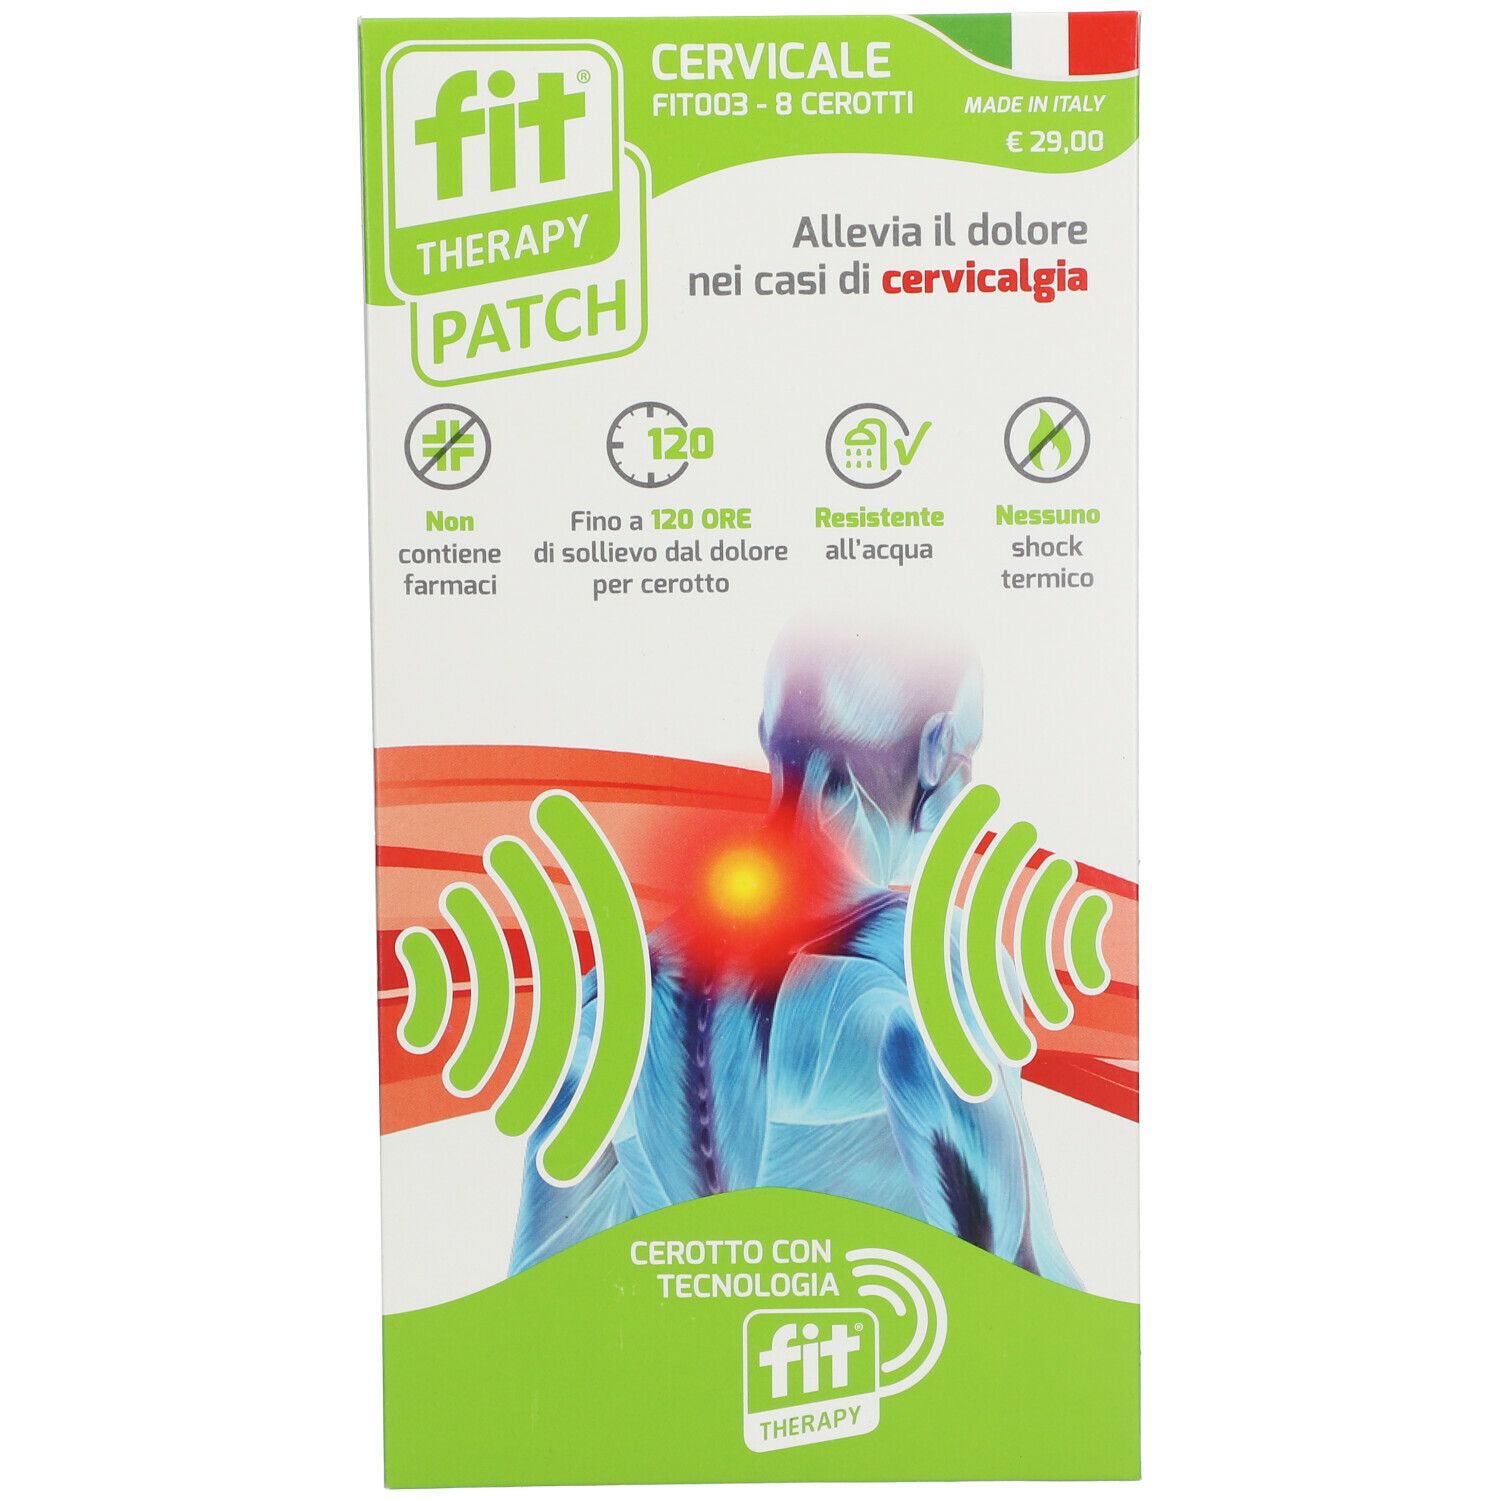 Image of FIT Therapy Patch Cerotto FIT Cervicale